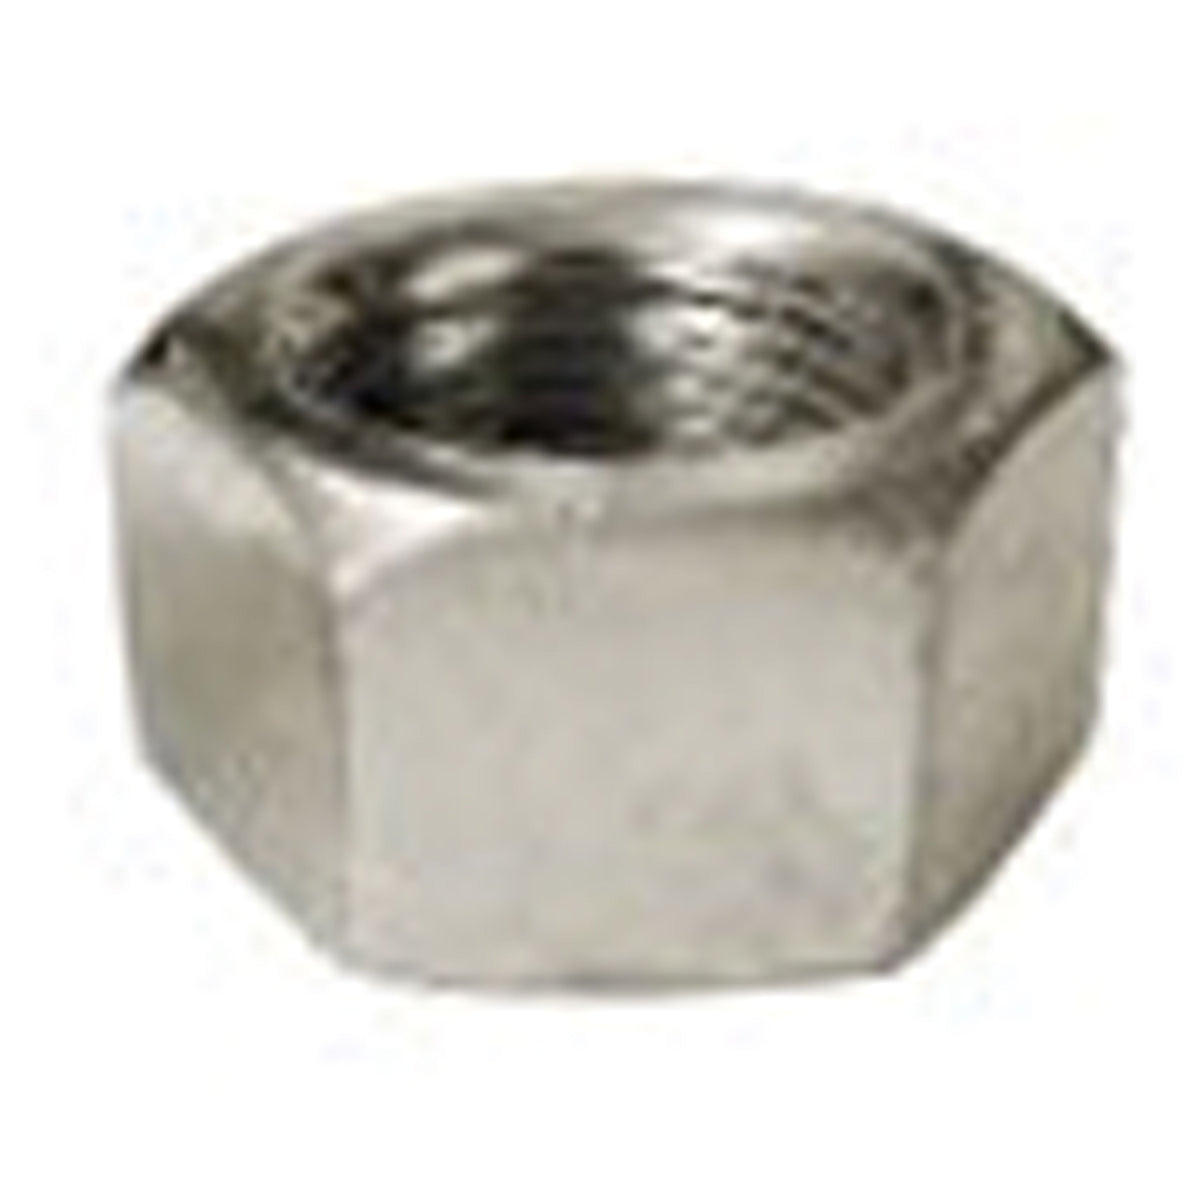 C.R. Brophy 2905 Hitch Ball Replacement Parts - 1" Zinc NF Hex Nut